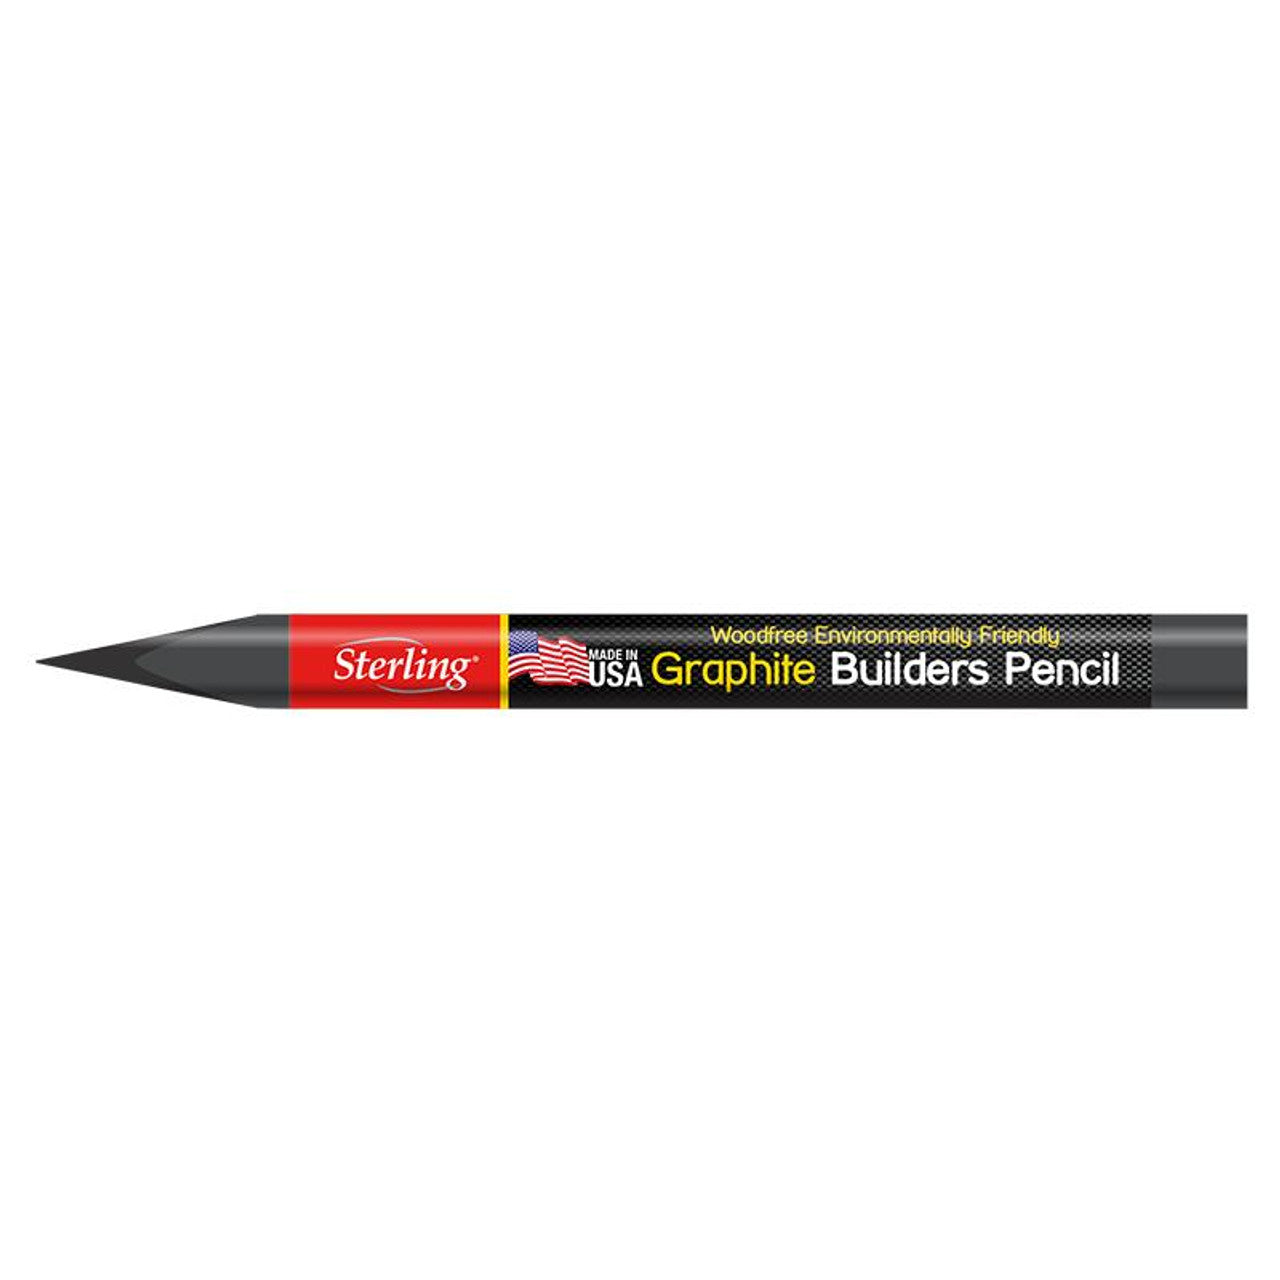 Graphite Builders Pencil SCP02 by Sterling